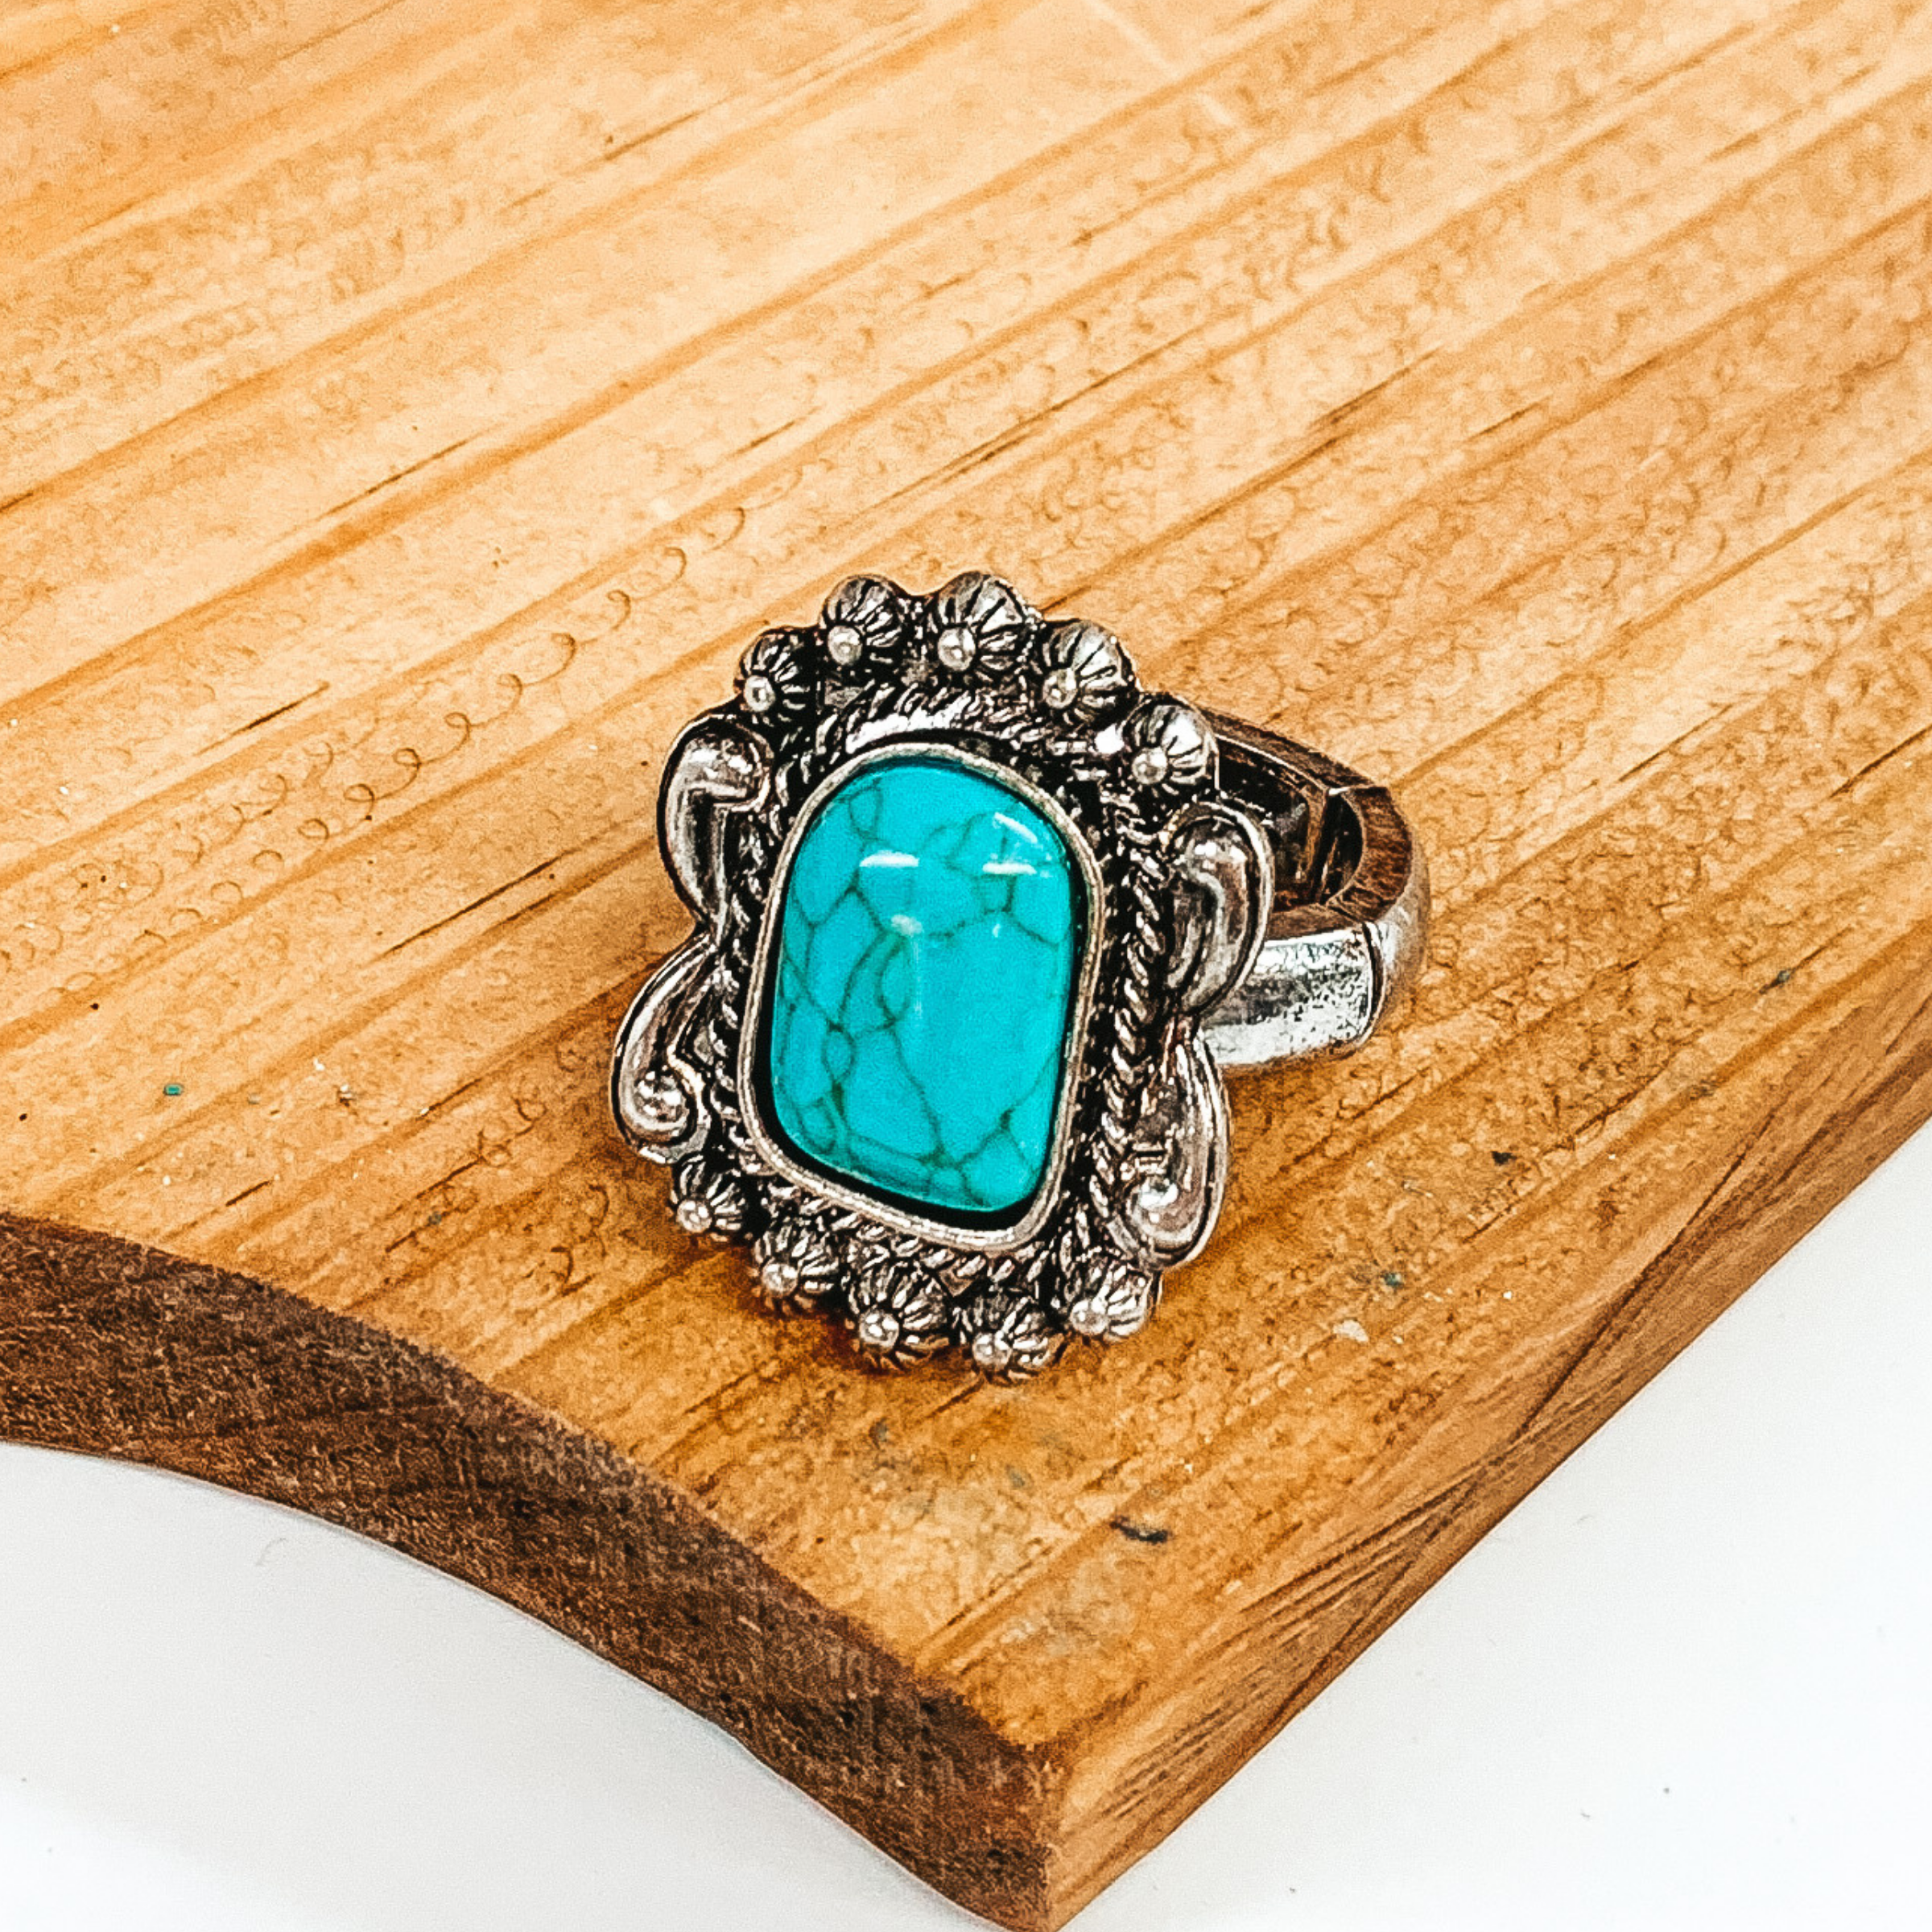 Silver stretchy ring that has a silver rectangular pendant with engraving and carving  detailing. In the center of the pendant, there is a turquoise rectangular stone. This ring is pictured laying on a brown block on a white background. 